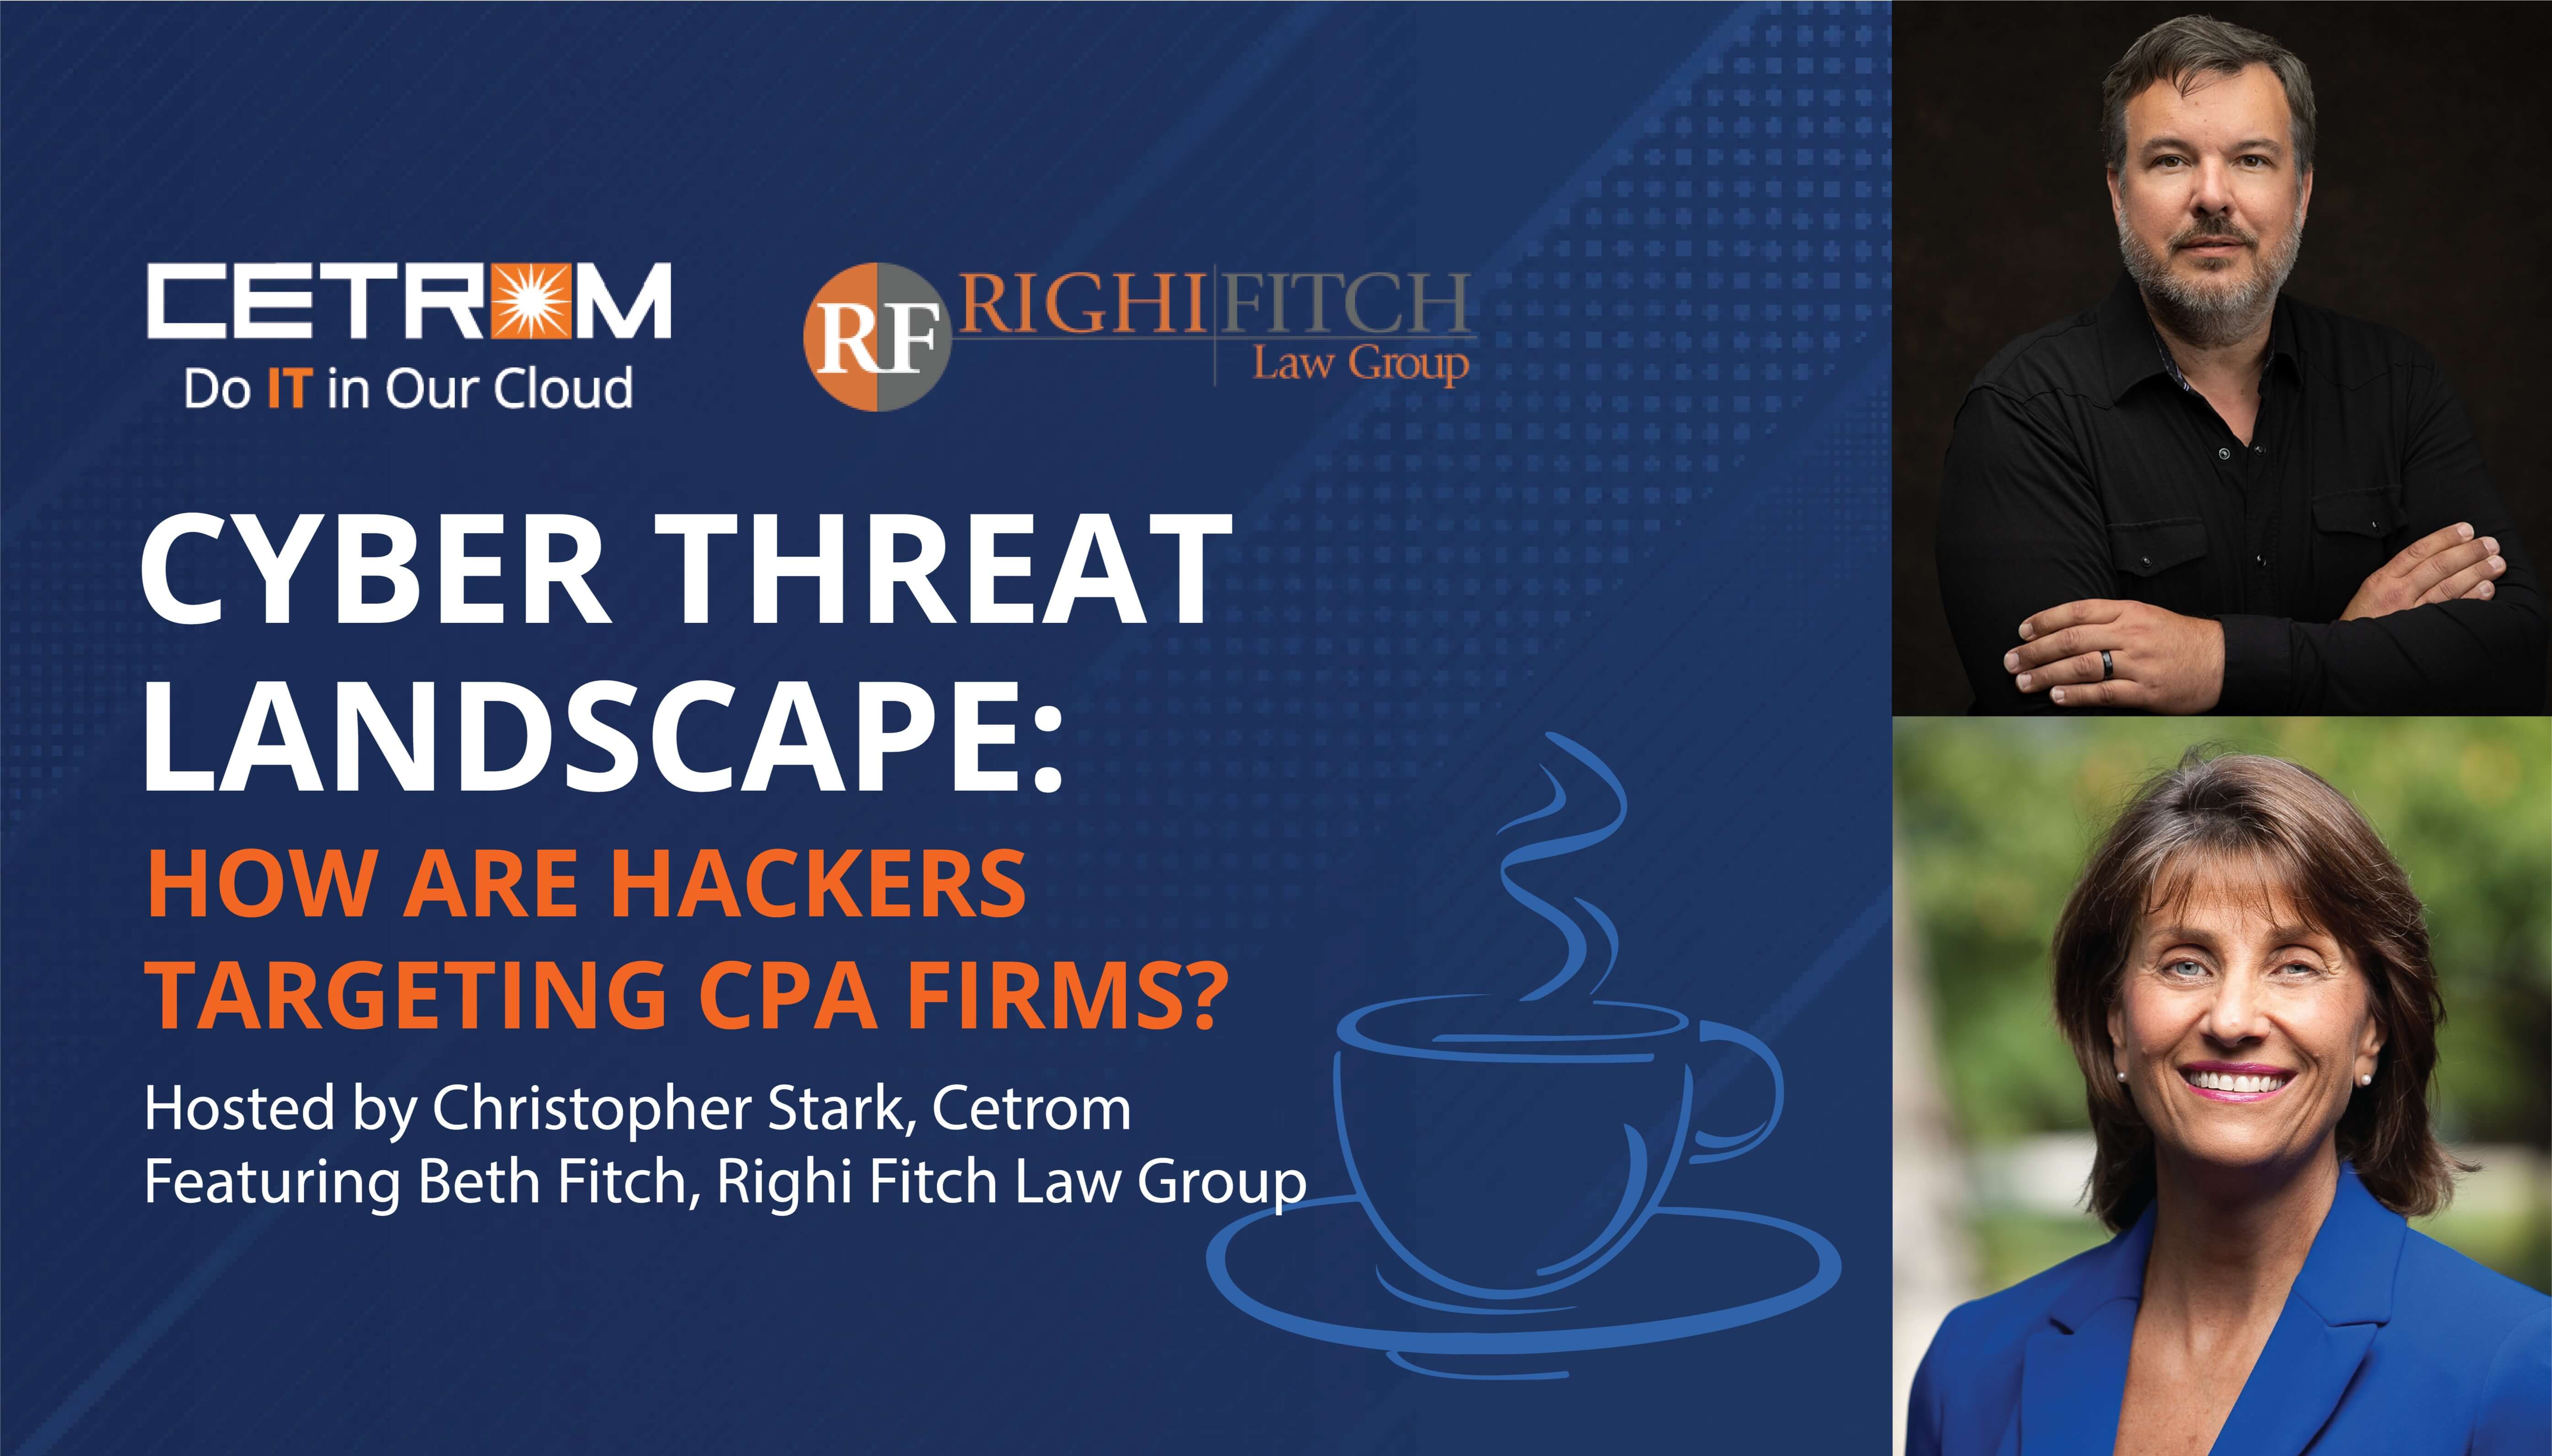 Coffee Talk: Cyber Threat Landscape: How are Hackers Targeting CPA Firms?